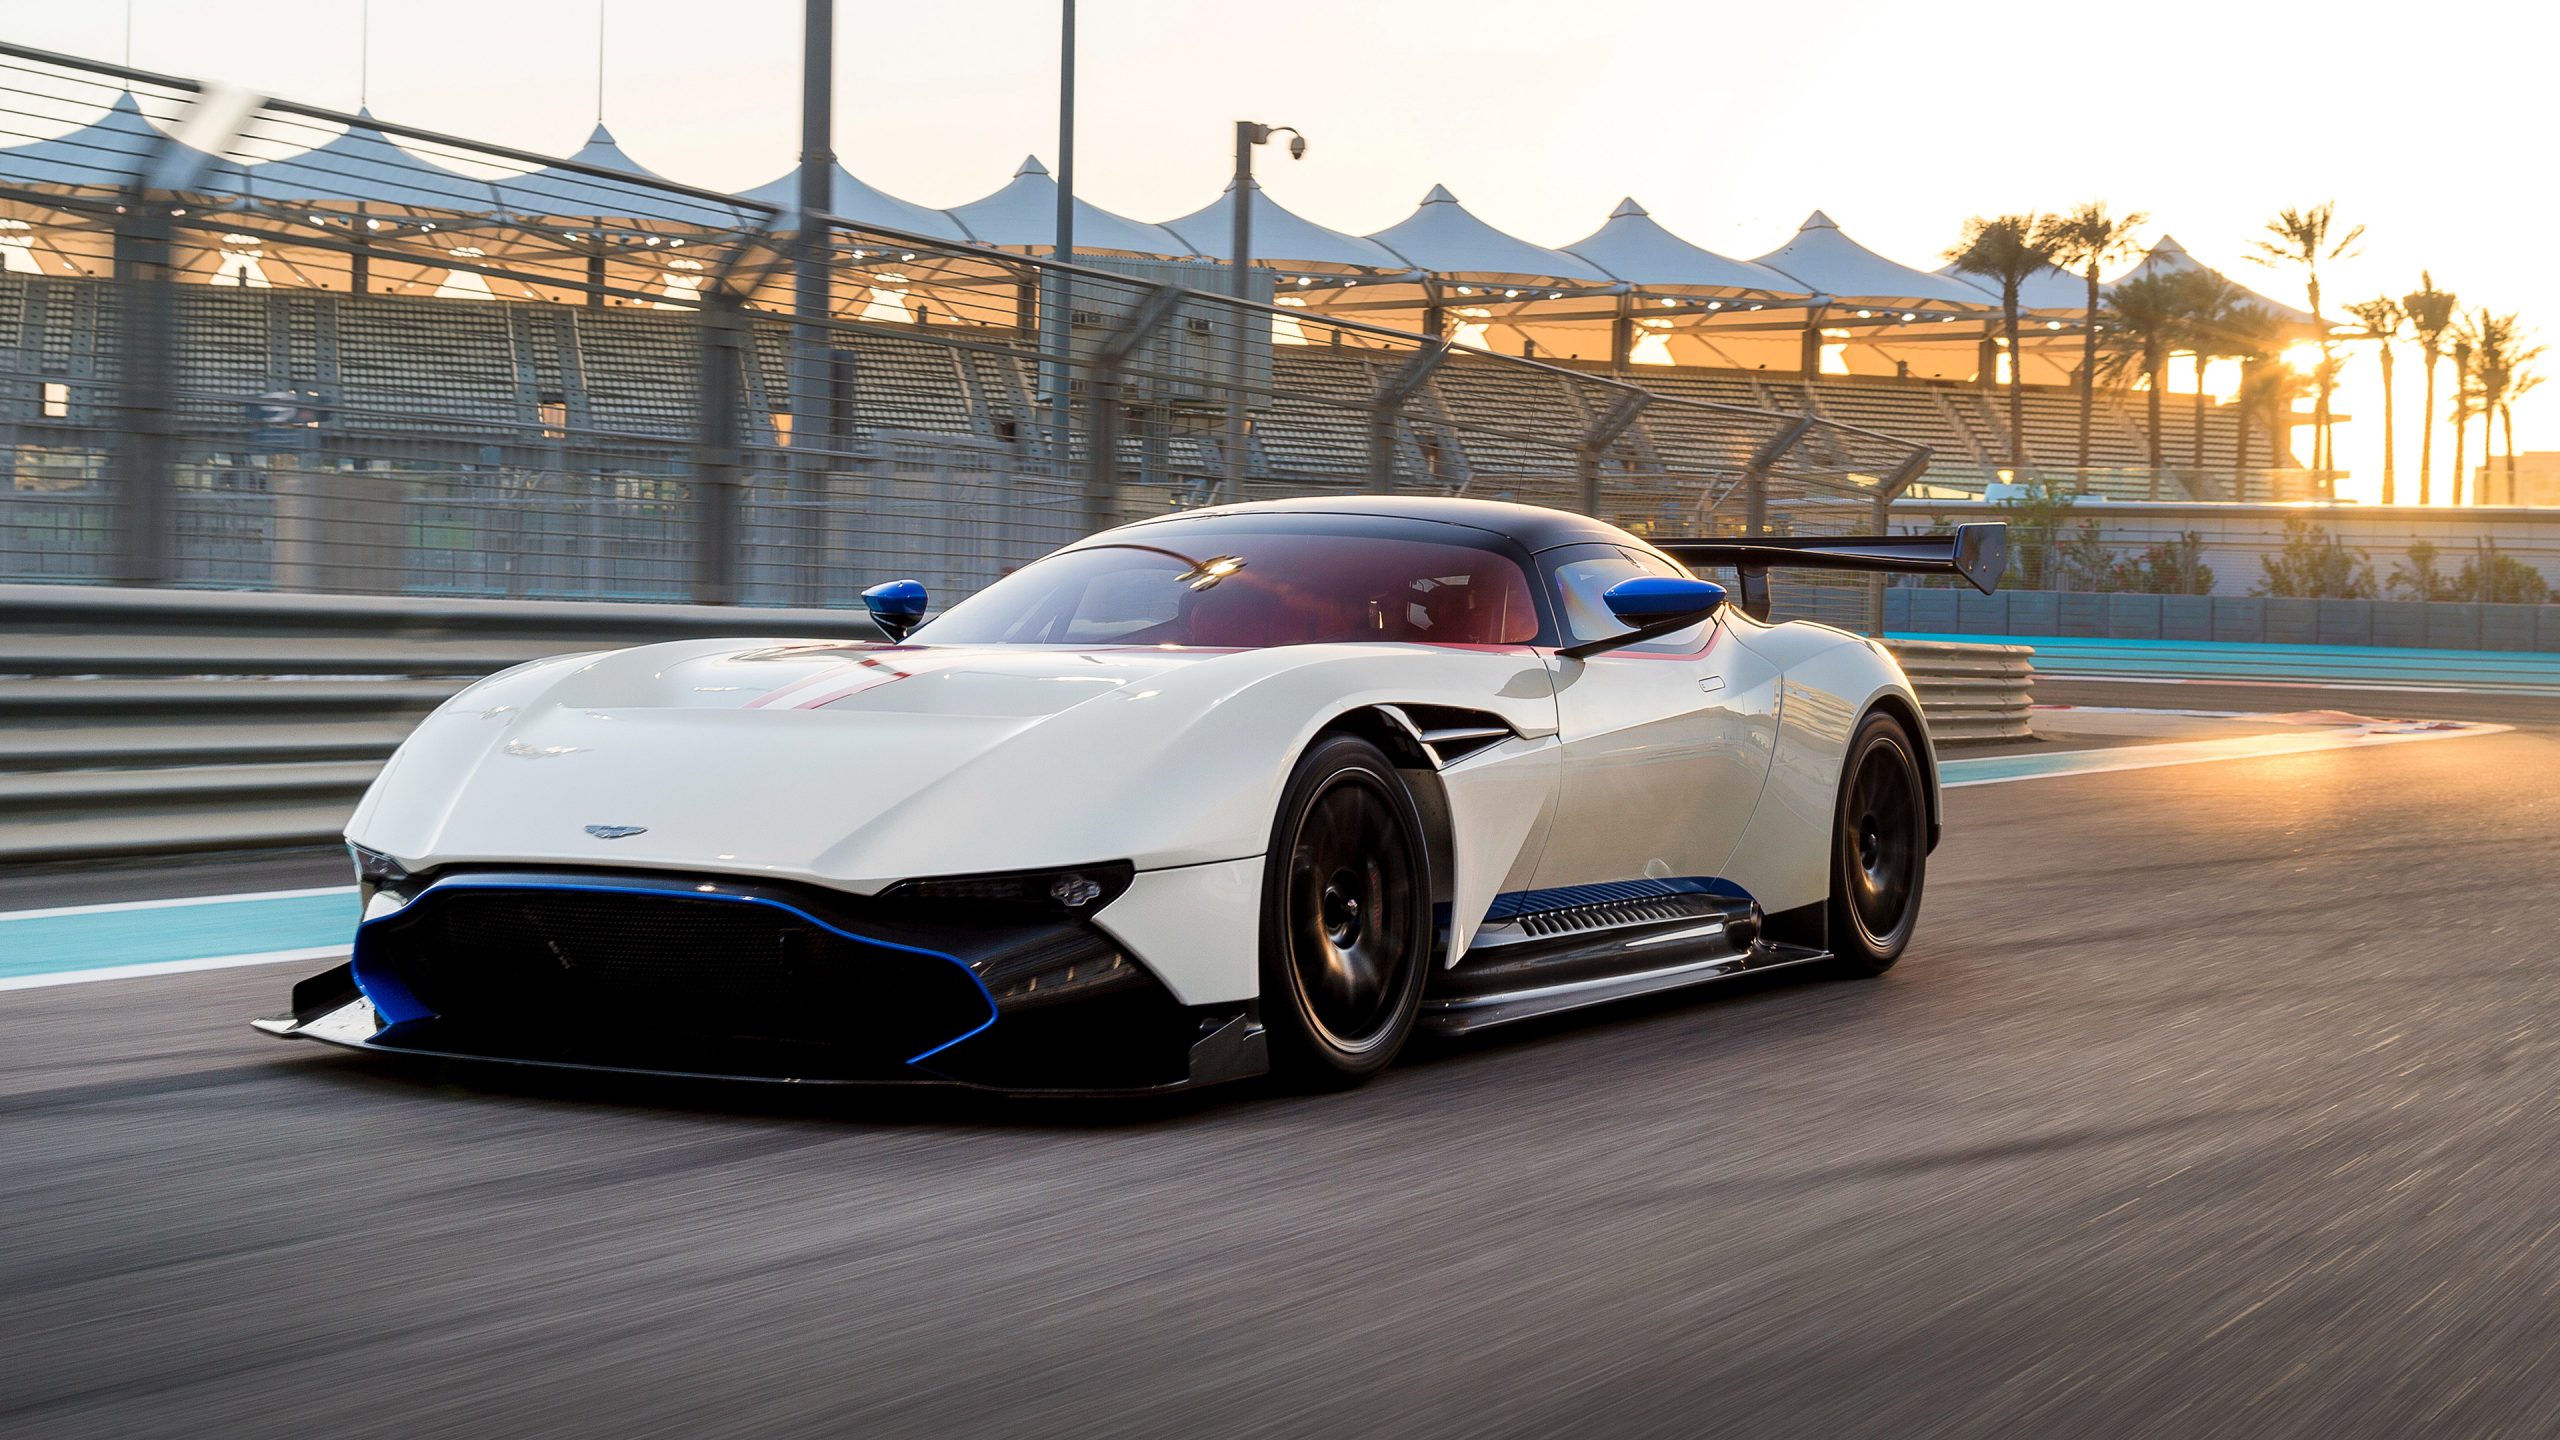 Stereotype tvetydigheden spørge Car Of The Day: 2015 Aston Martin Vulcan | Supercars.net